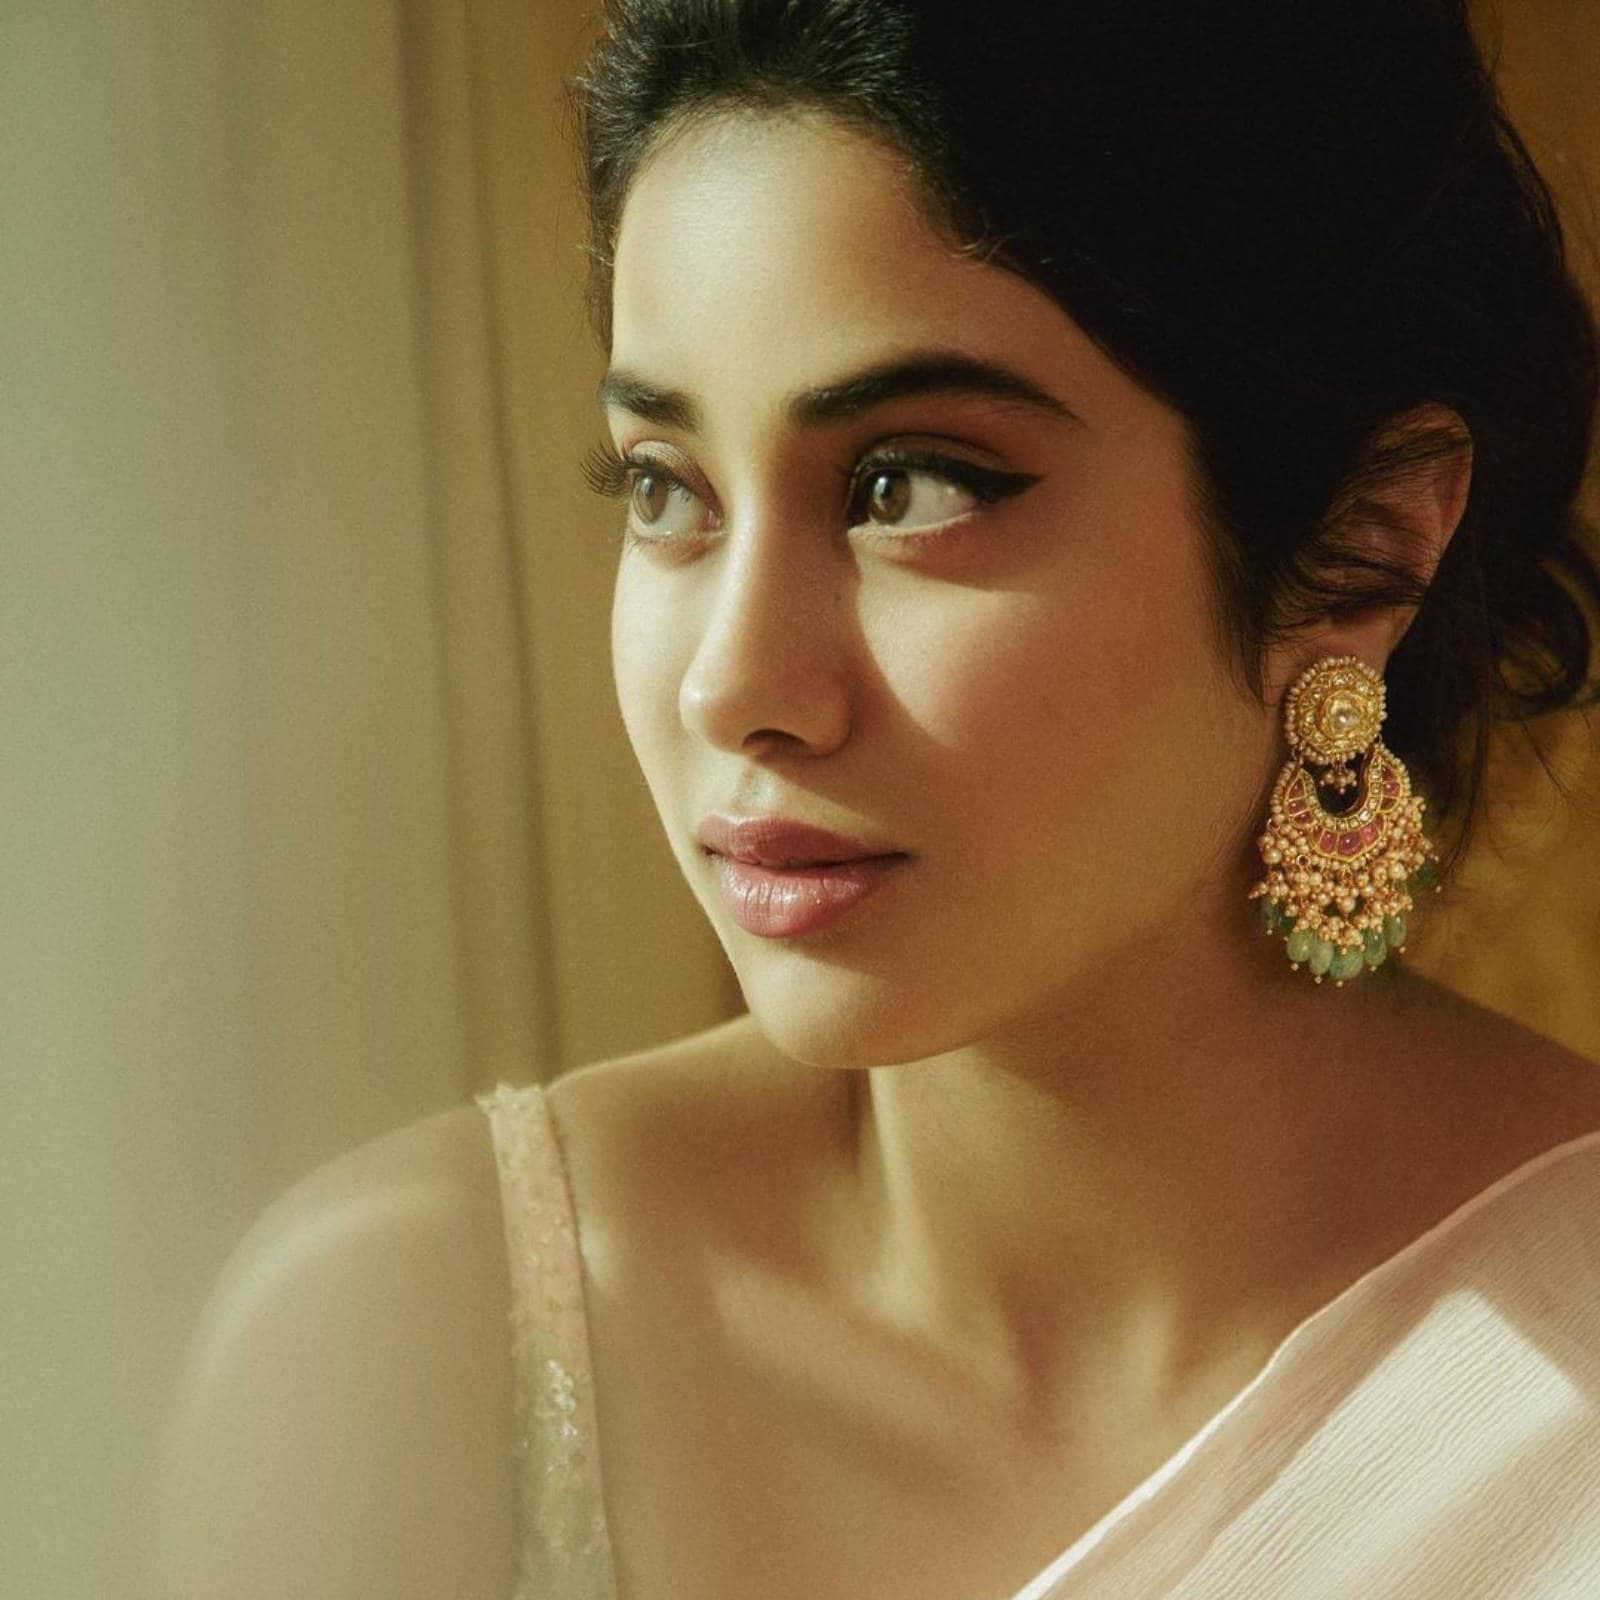 Meharin Sex Videos - Janhvi Kapoor Channels Old Bollywood Glamour In Latest Photoshoot, See The  Diva's Gorgeous Pics - News18